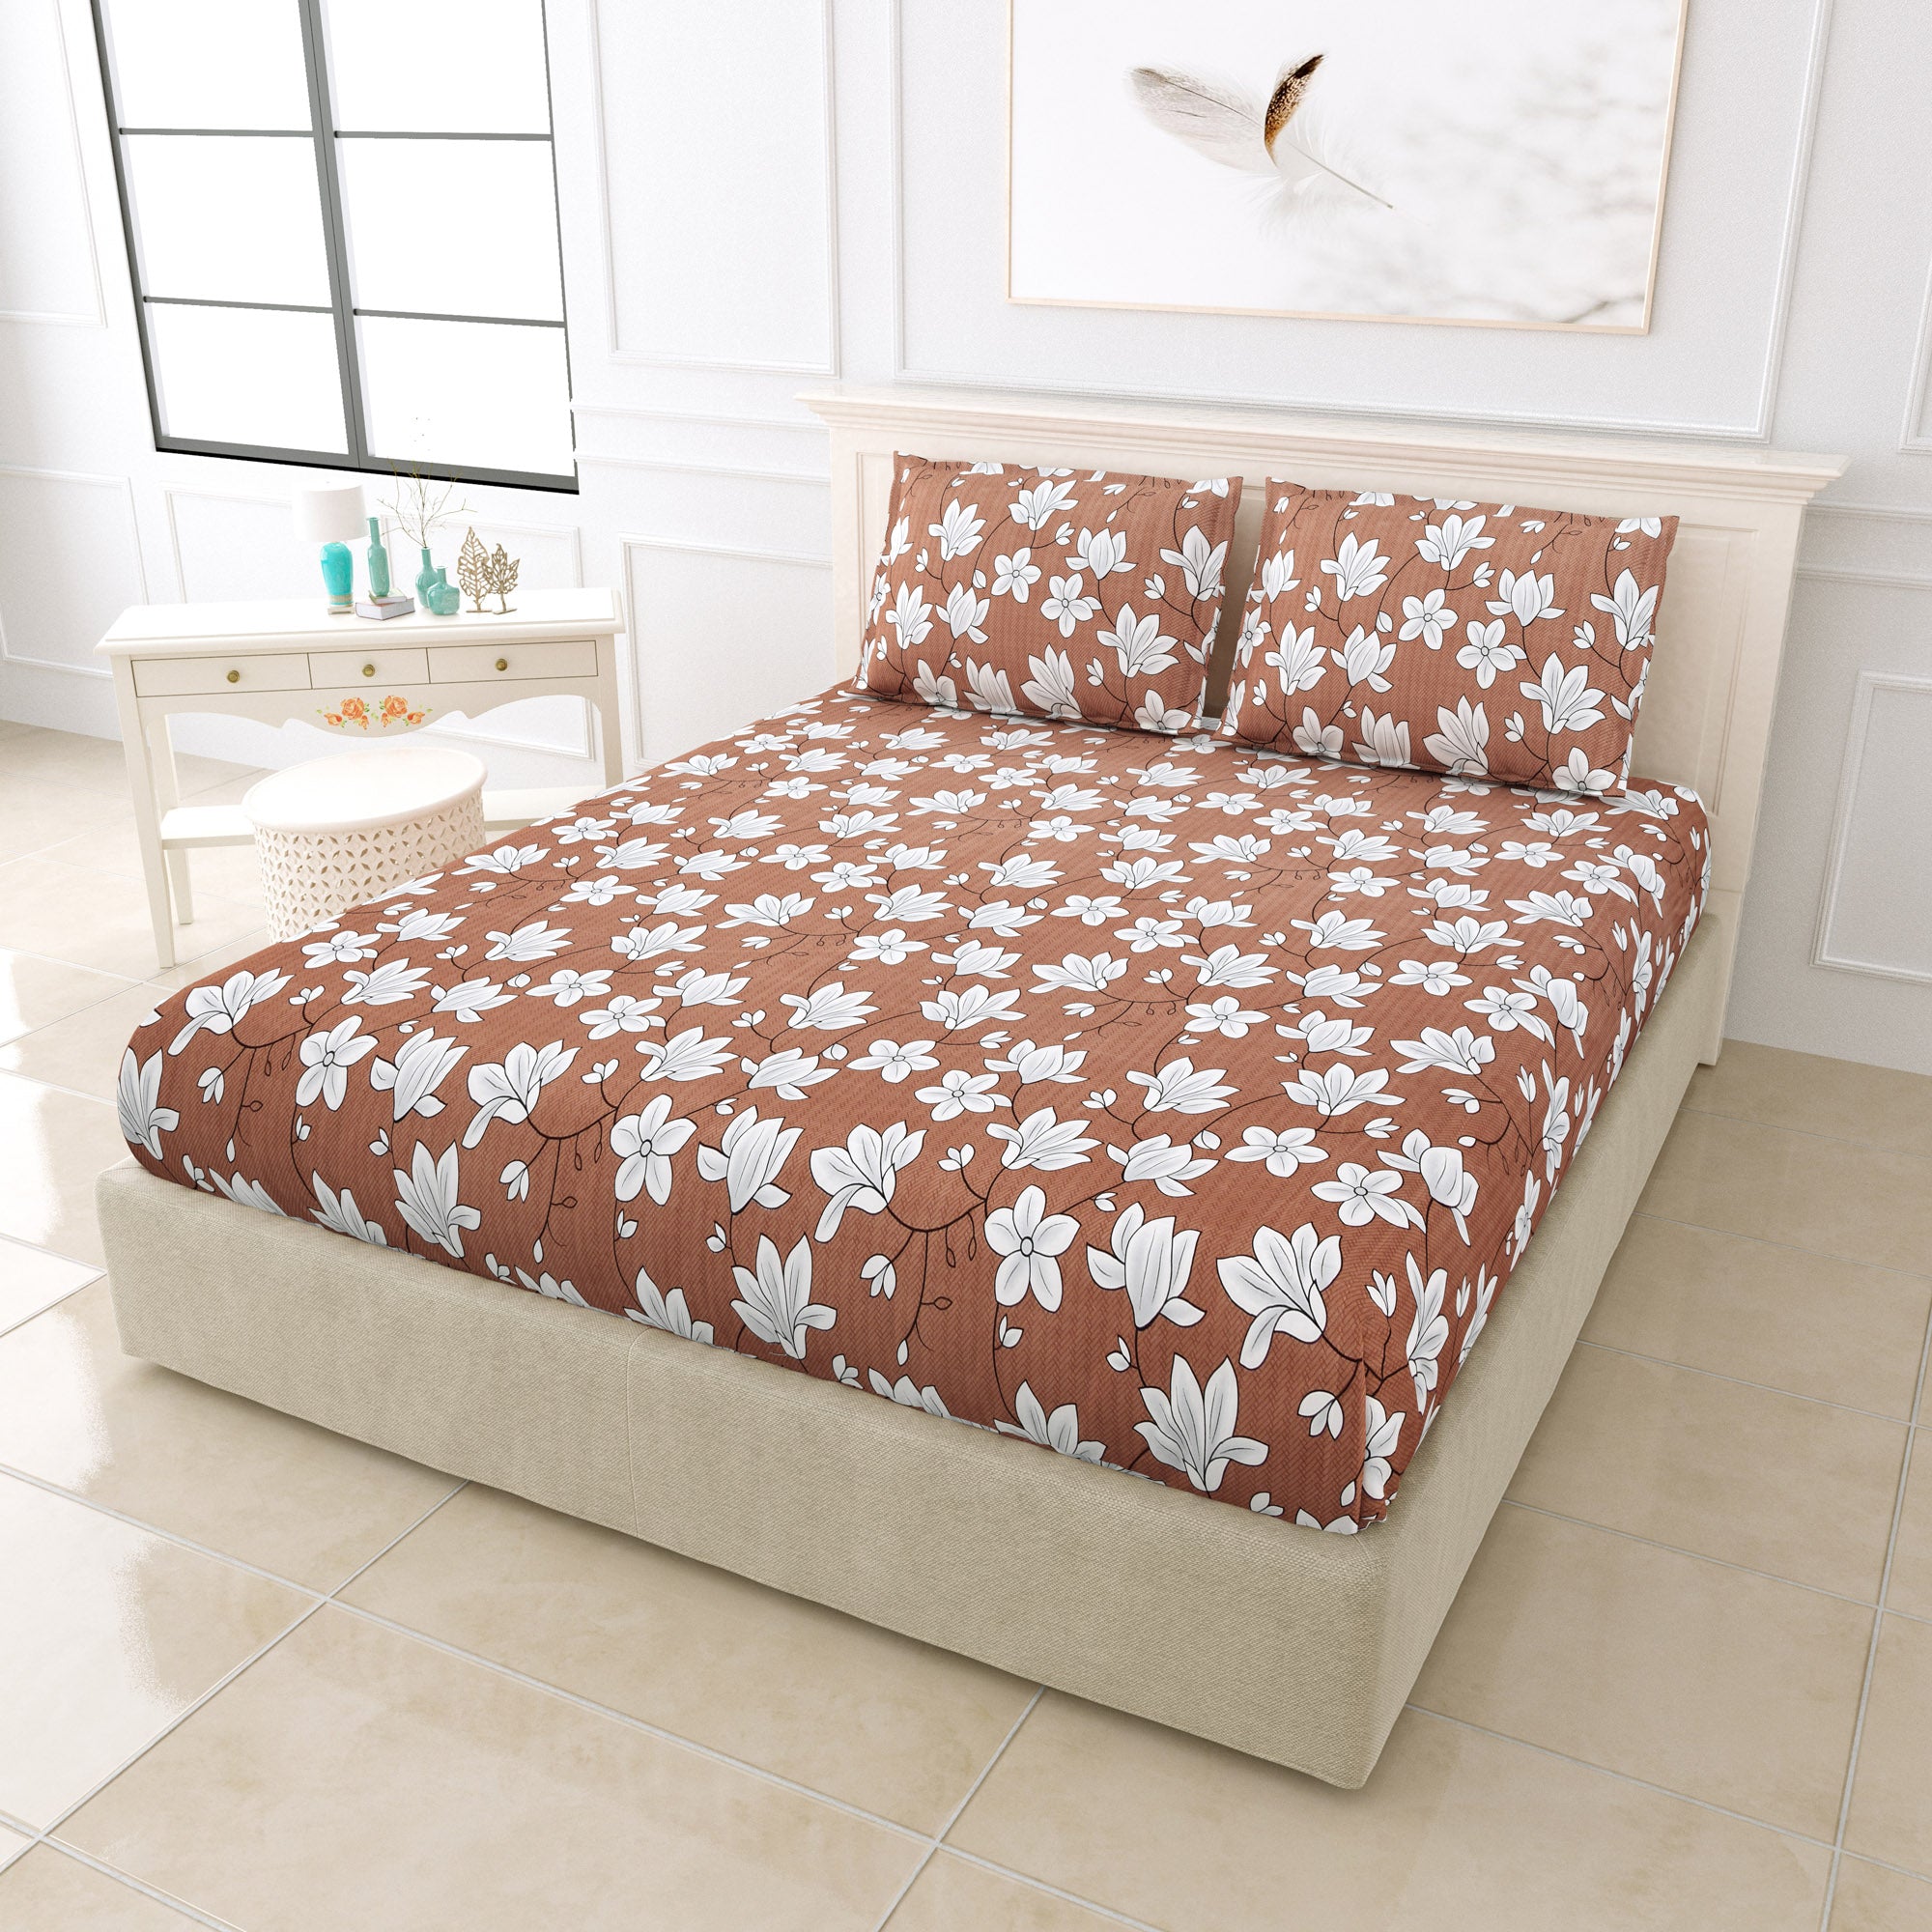 eCraftIndia 250 TC Brown & White Flowers Printed Cotton Double Bedsheet With 2 Pillow Covers 1